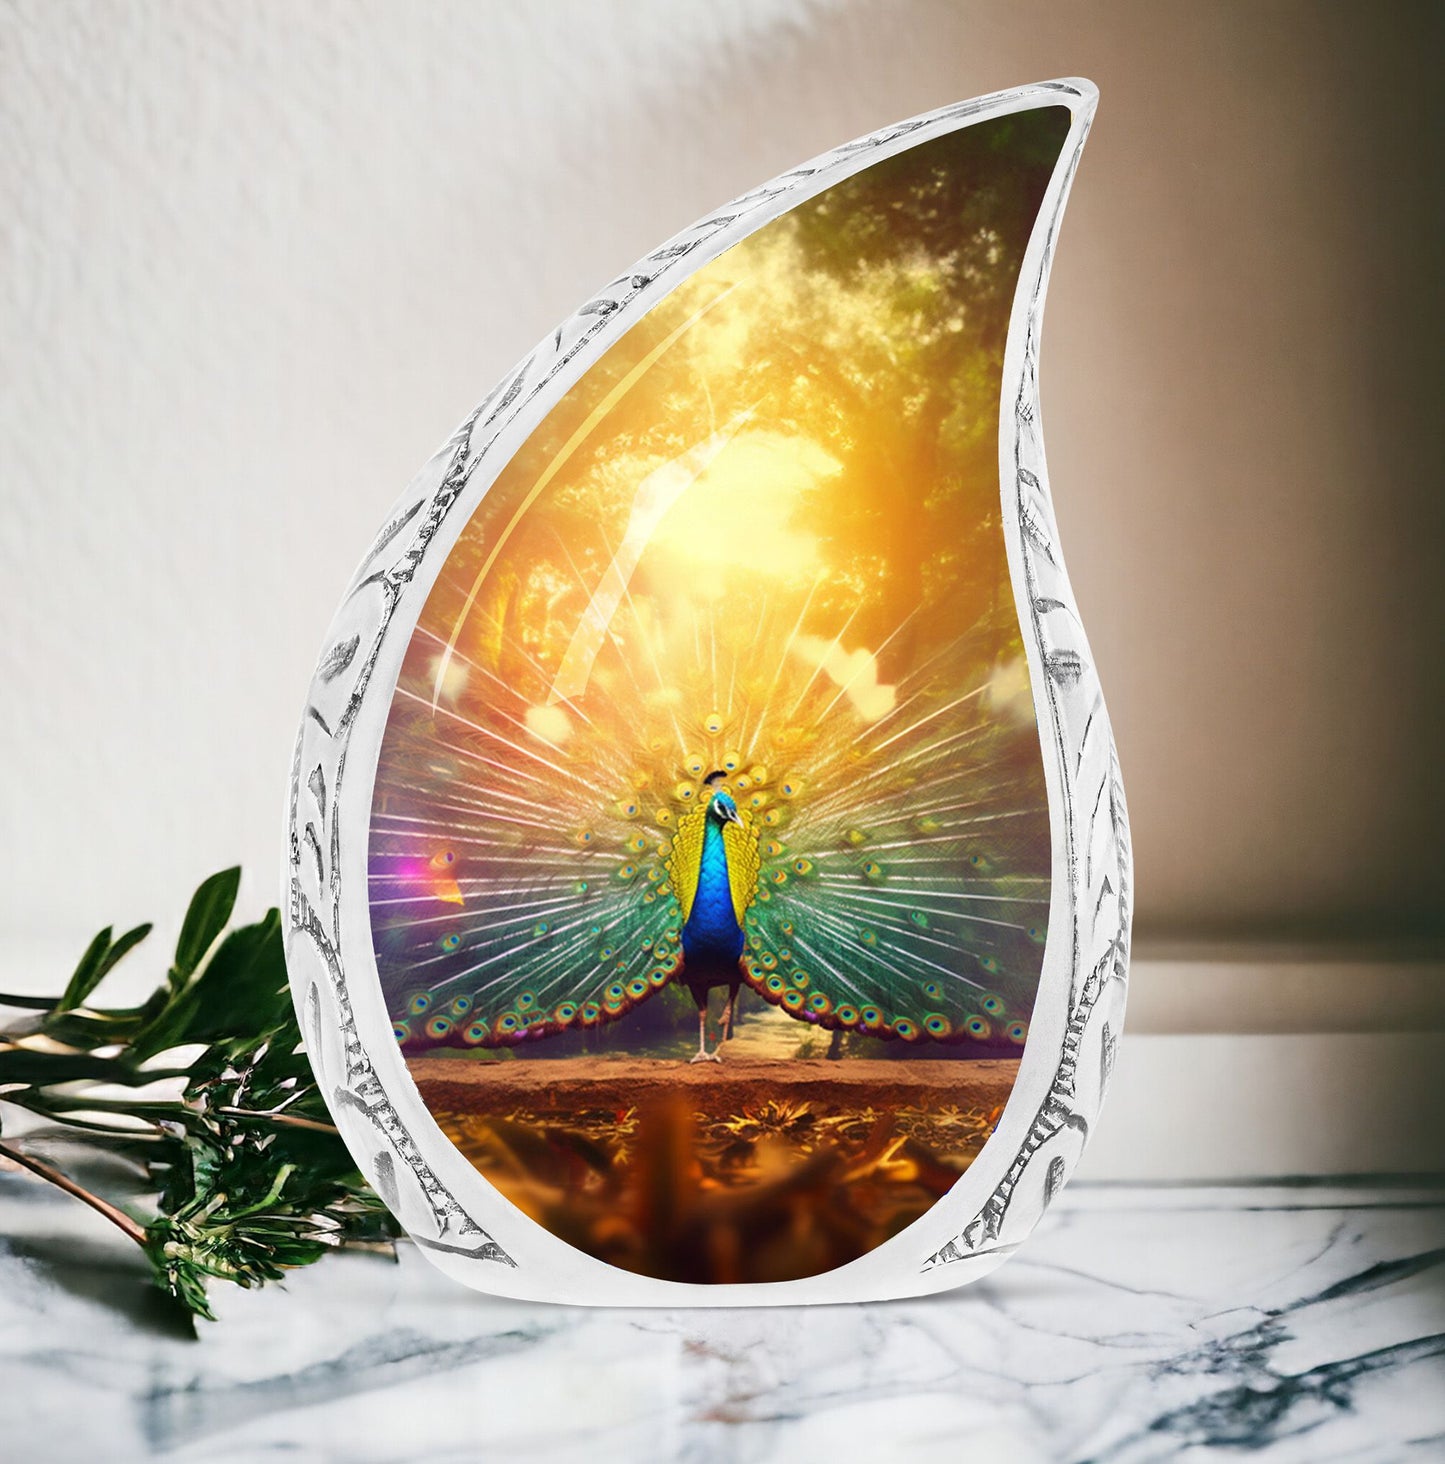 Large, artistic peacock themed funeral urn for adults, perfect for storing ashes with dignity and elegance